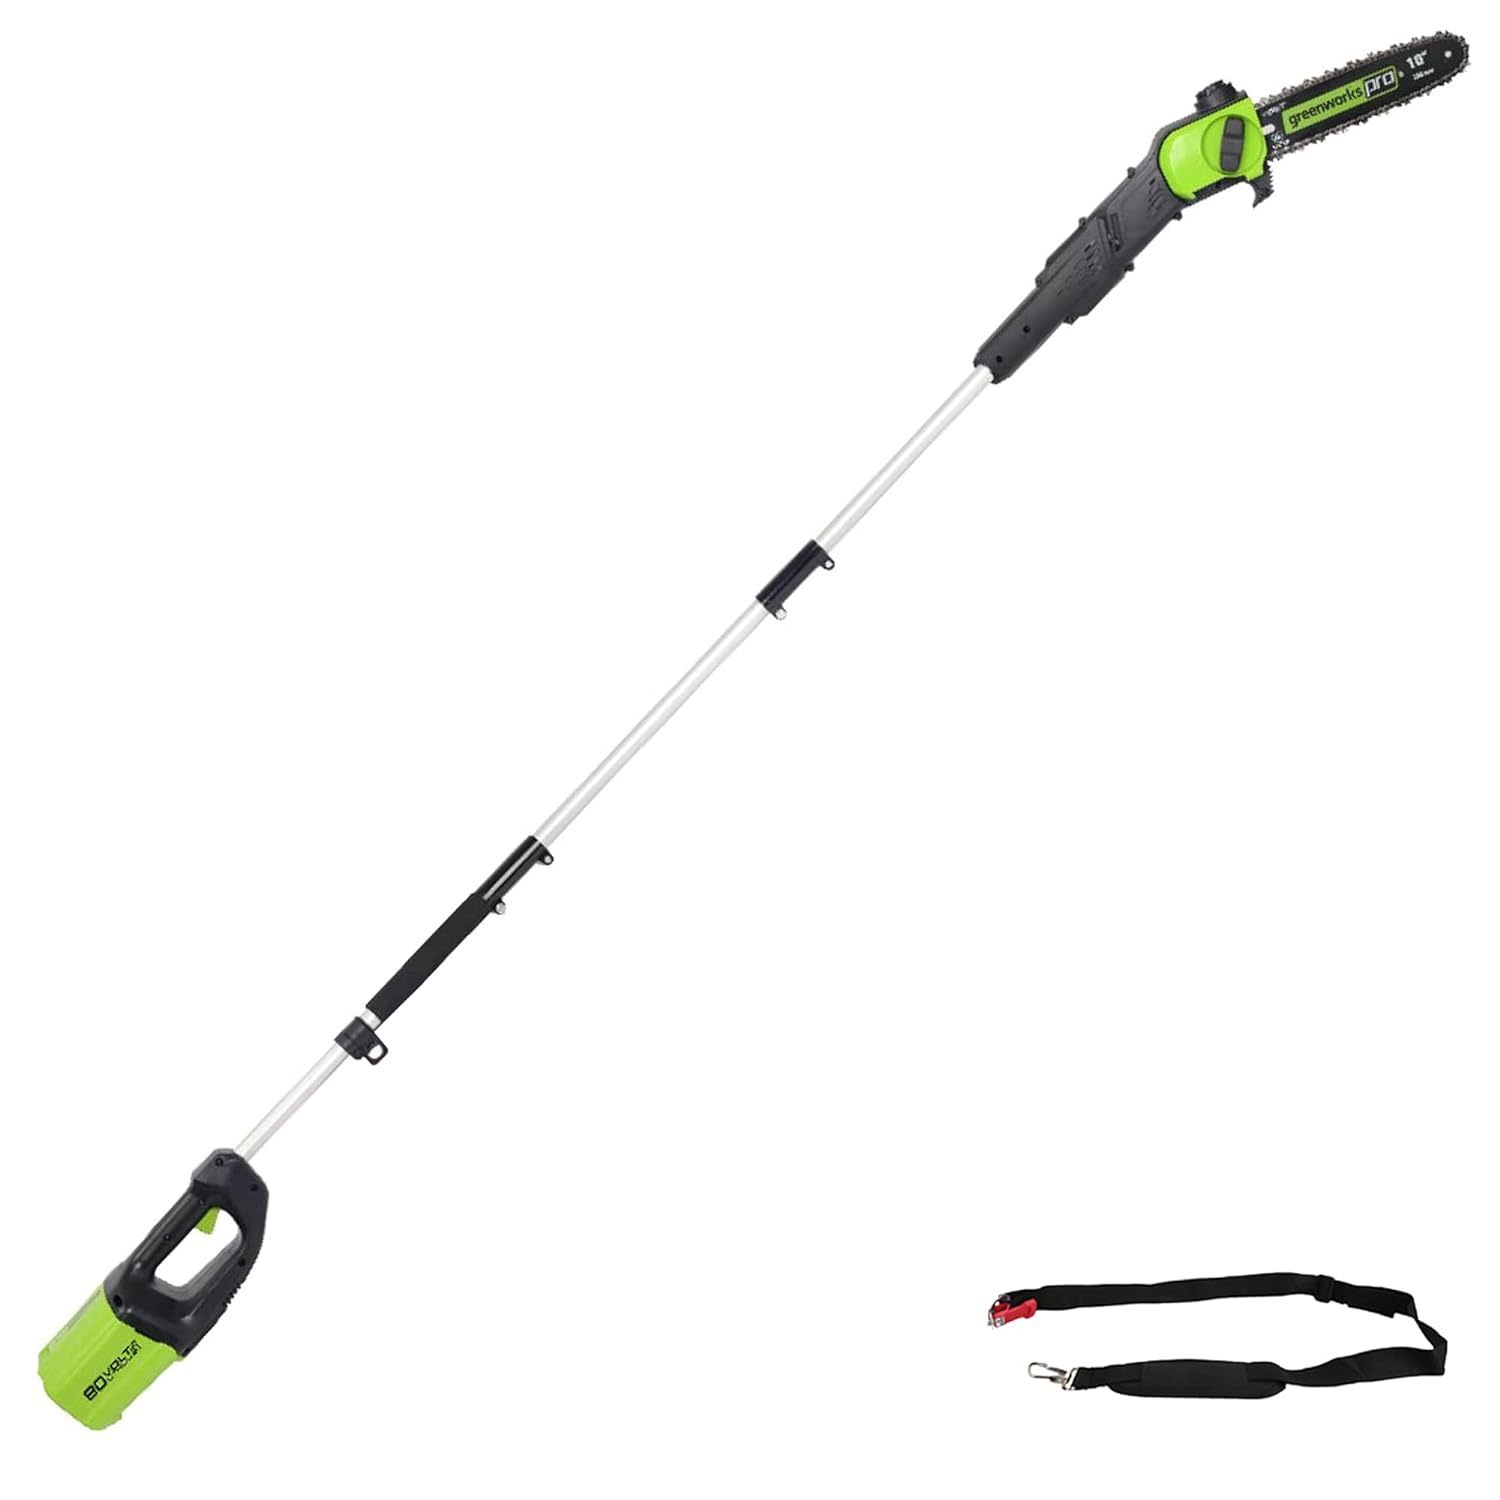 Primary image for Greenworks 80V 10" Cordless Polesaw (Great For Pruning and Trimming Branches / 7